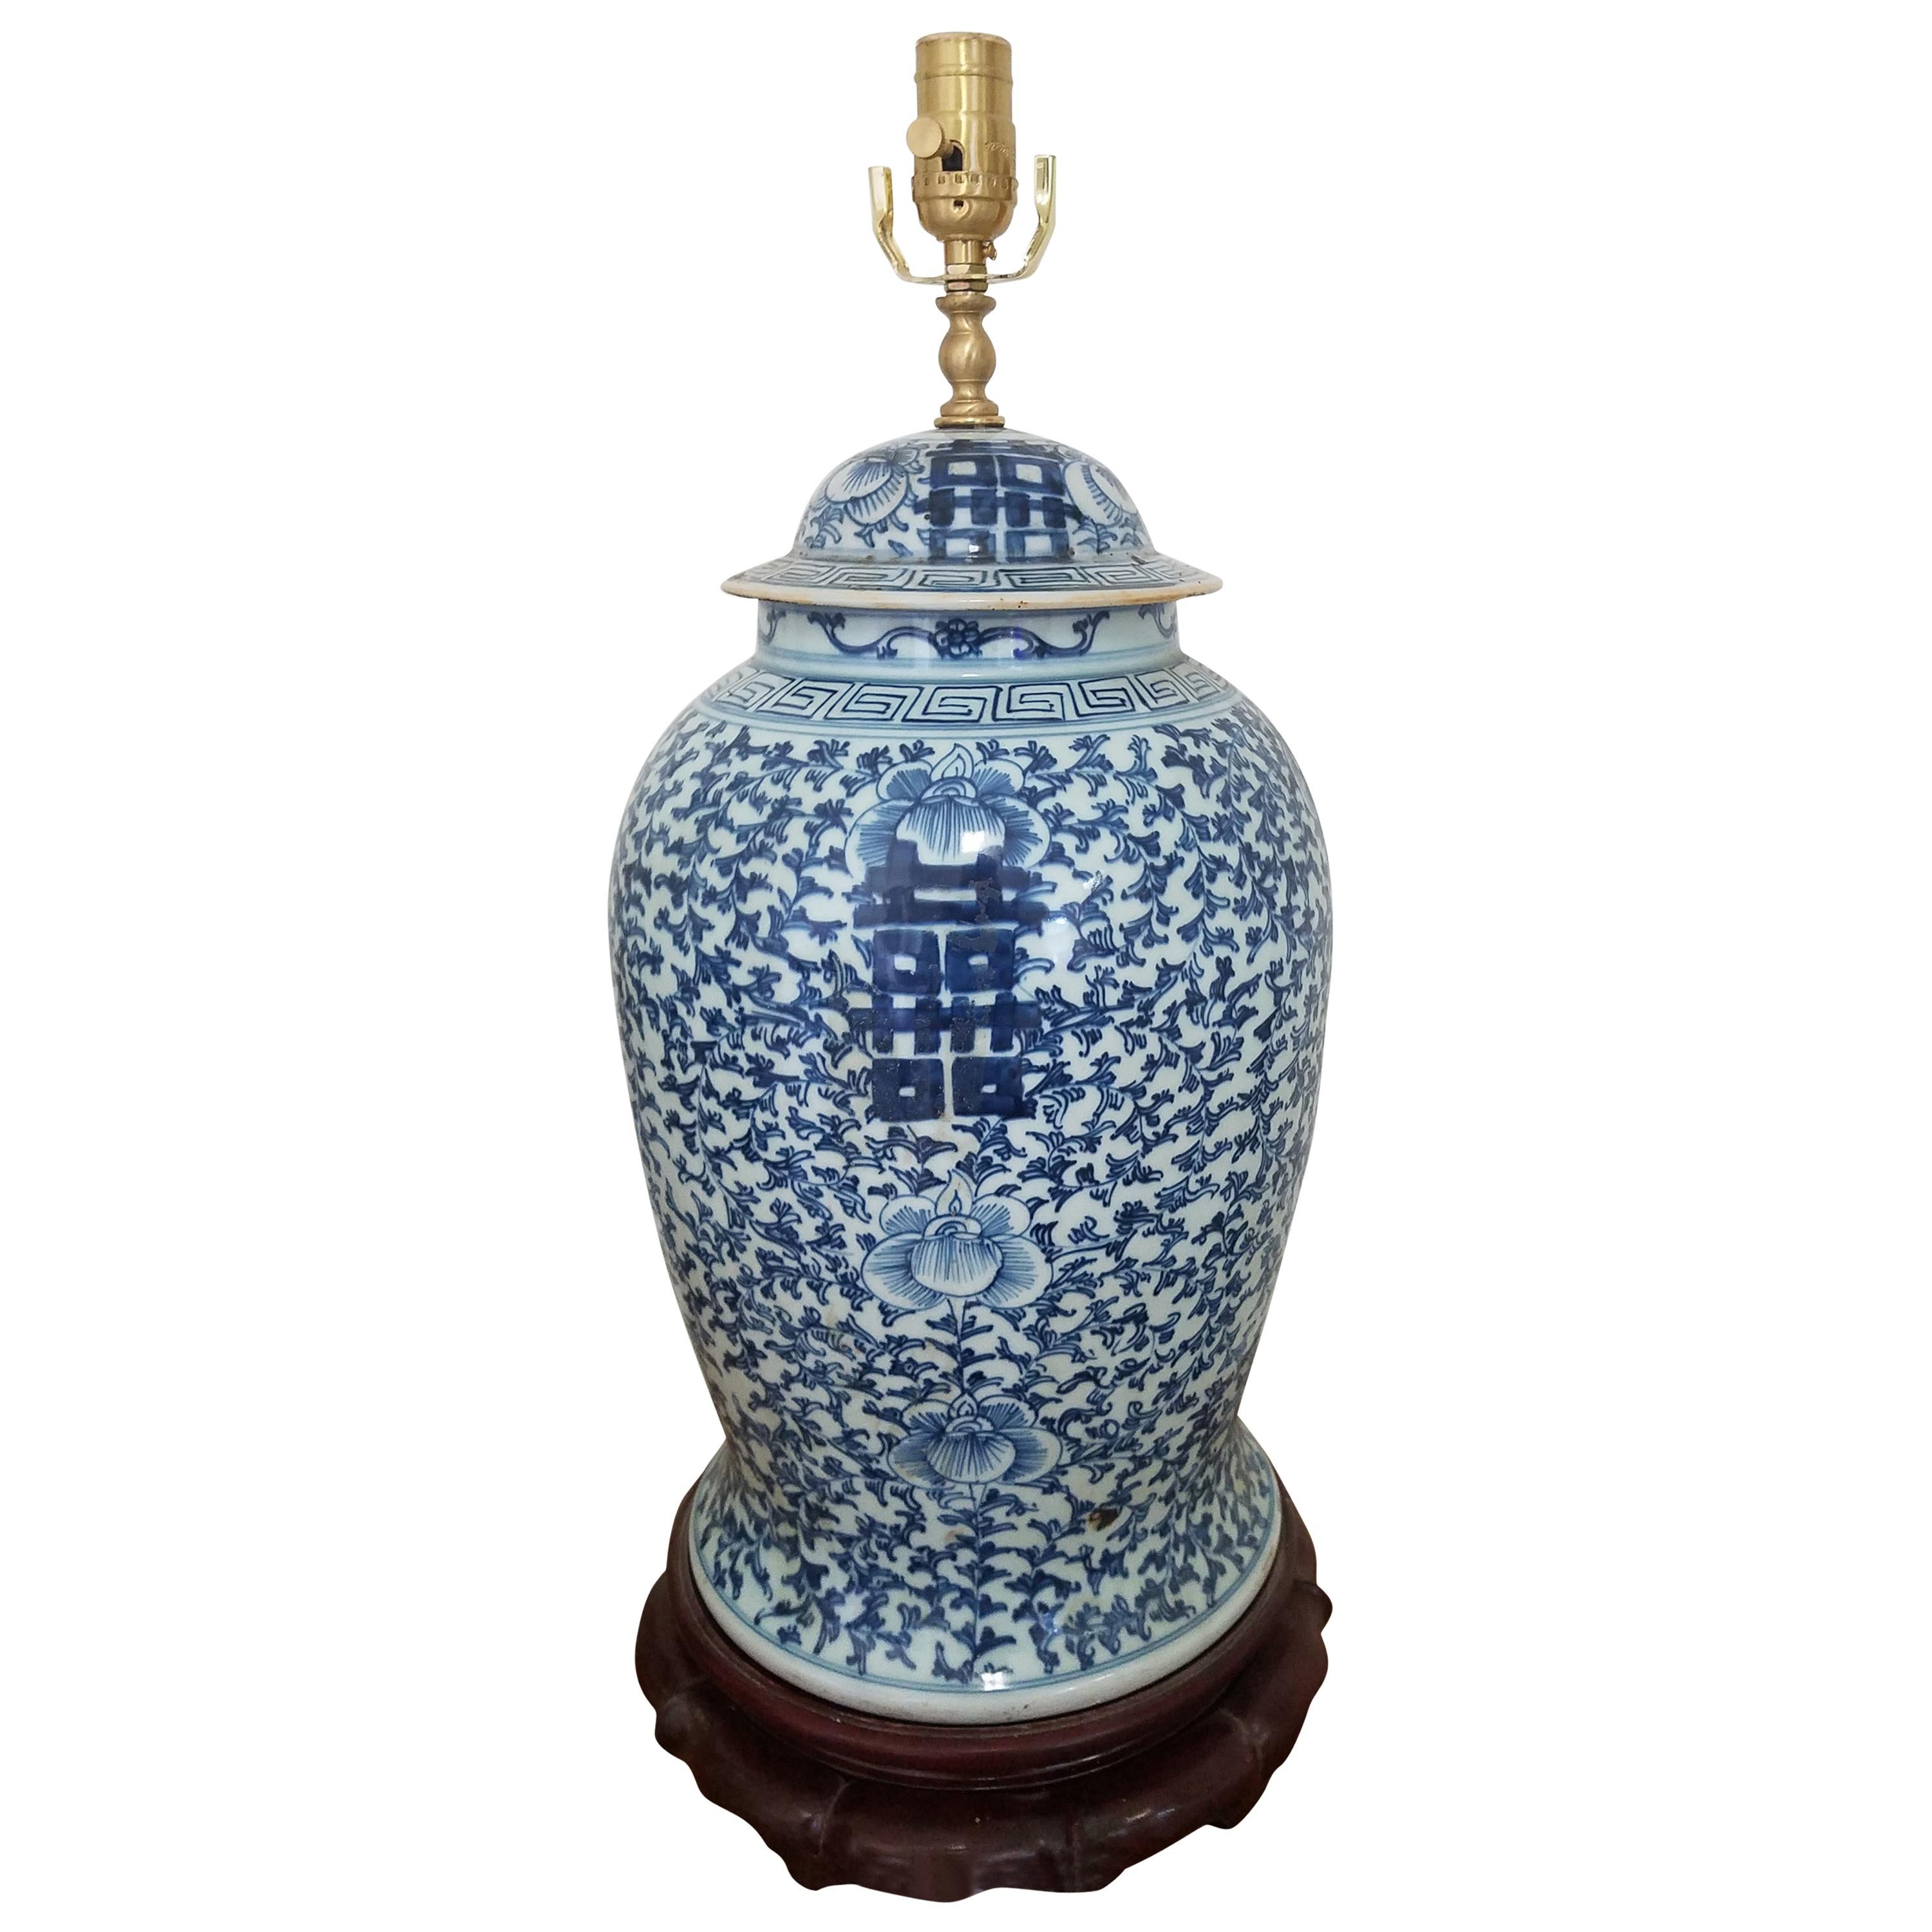 Antique Hand Painted Chinese Porcelain Lamp